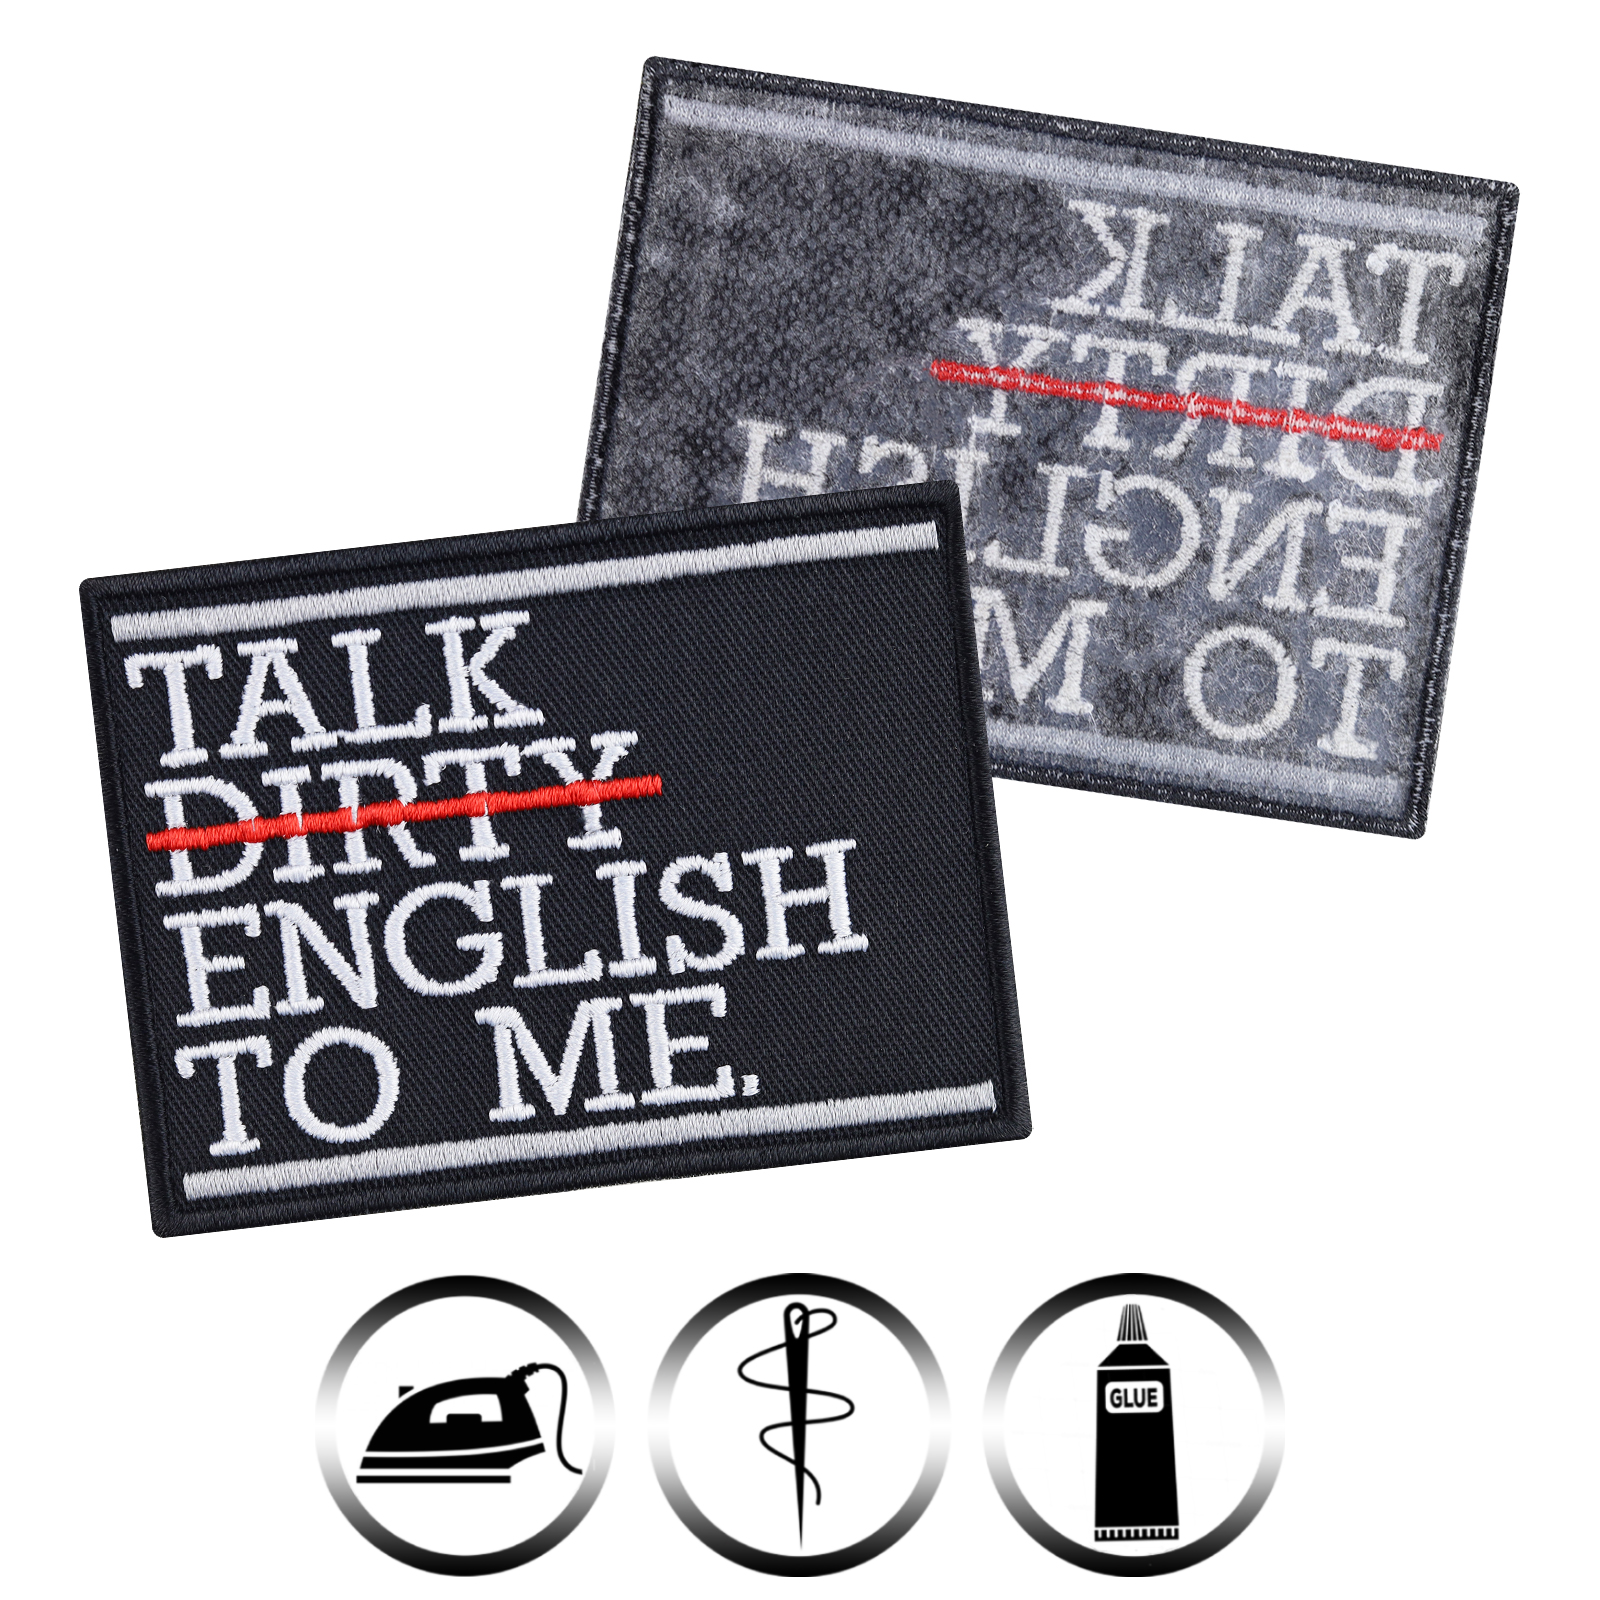 Talk english to me - Patch